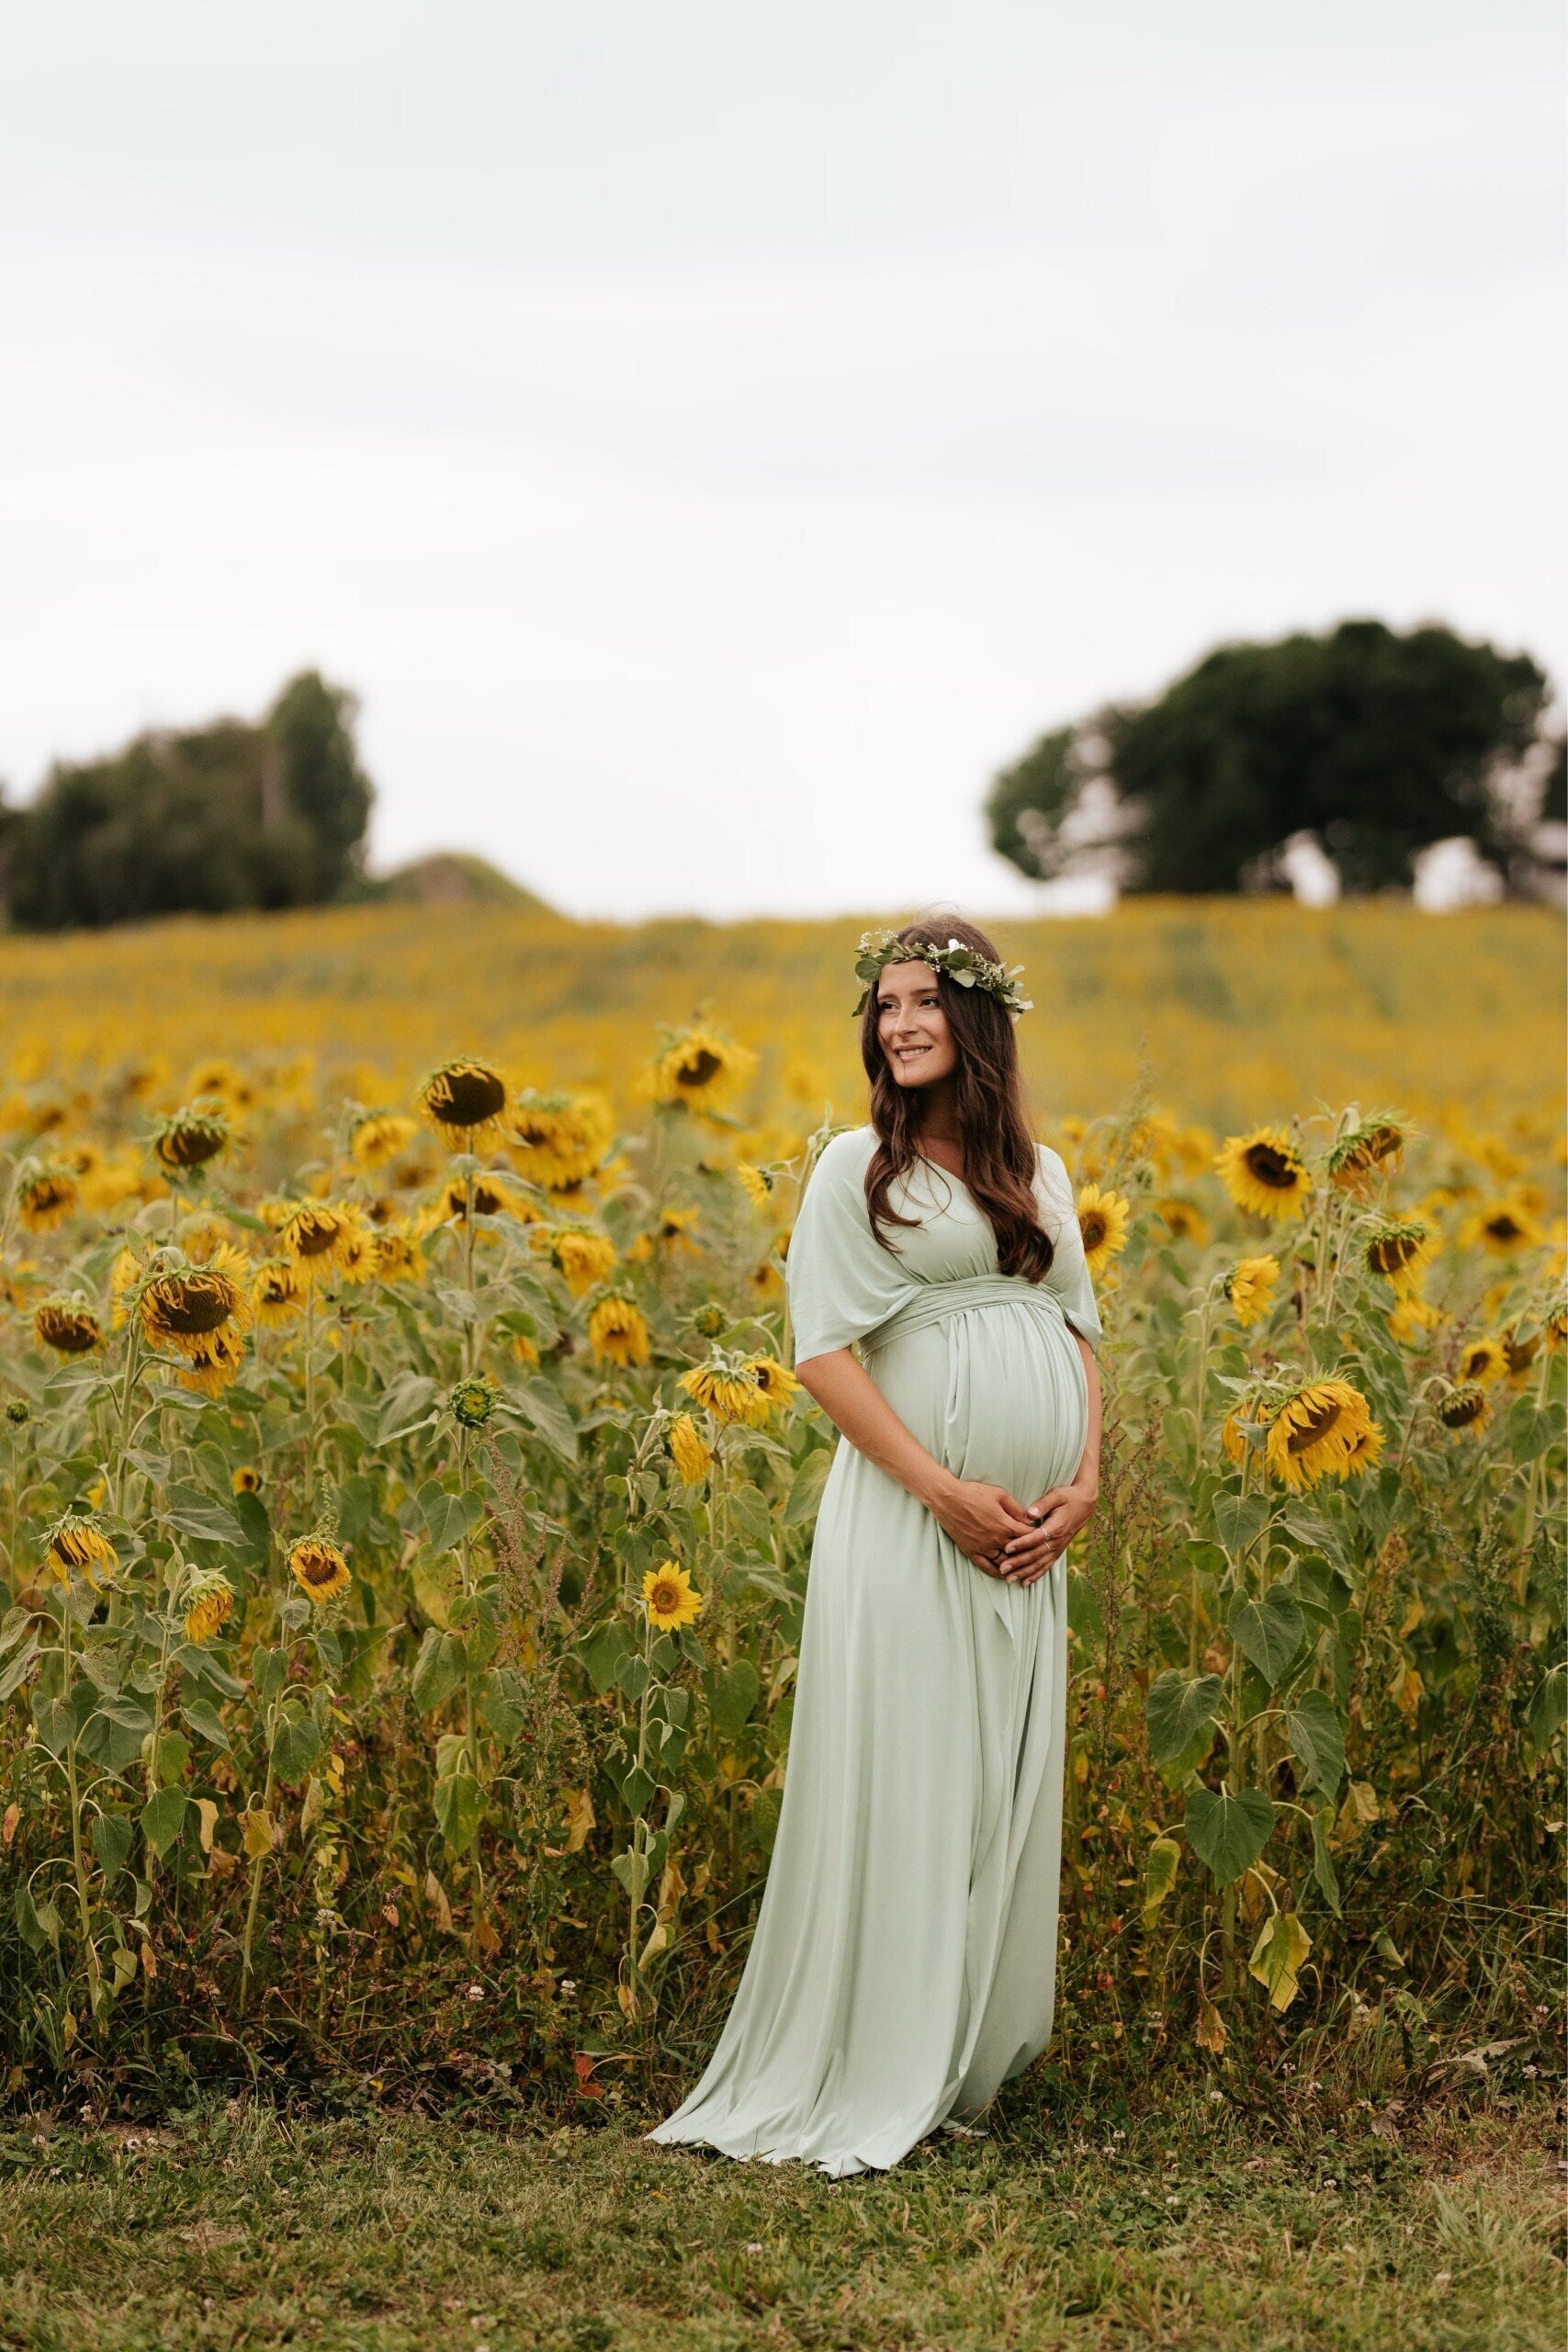 Maternity Dress for Baby Shower Photoshoot - Made In USA